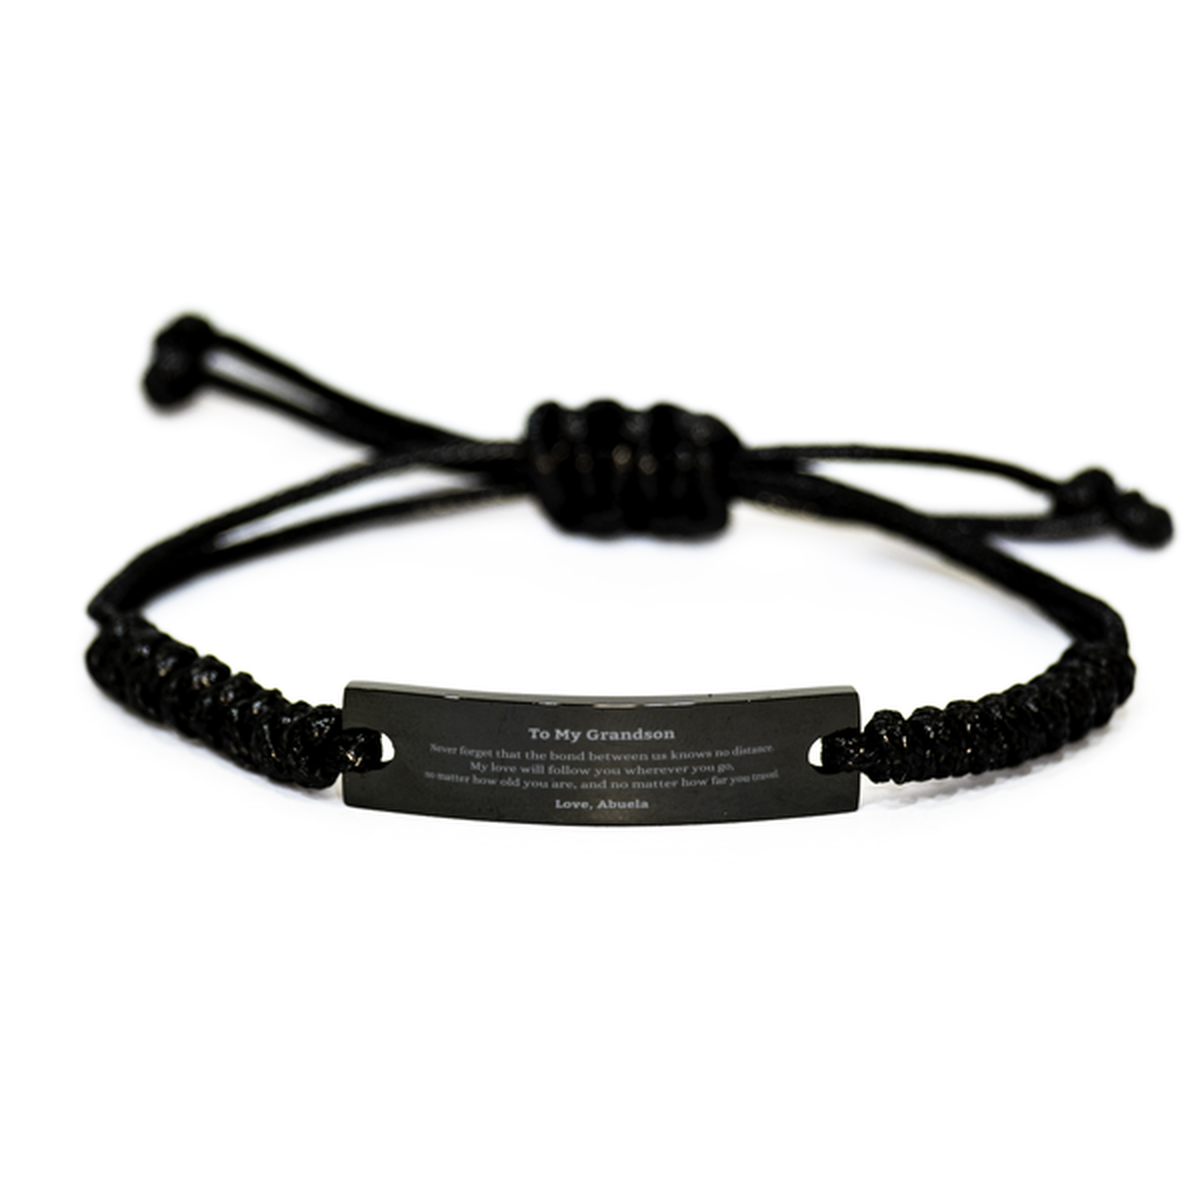 Grandson Birthday Gifts from Abuela, Adjustable Black Rope Bracelet for Grandson Christmas Graduation Unique Gifts Grandson Never forget that the bond between us knows no distance. Love, Abuela